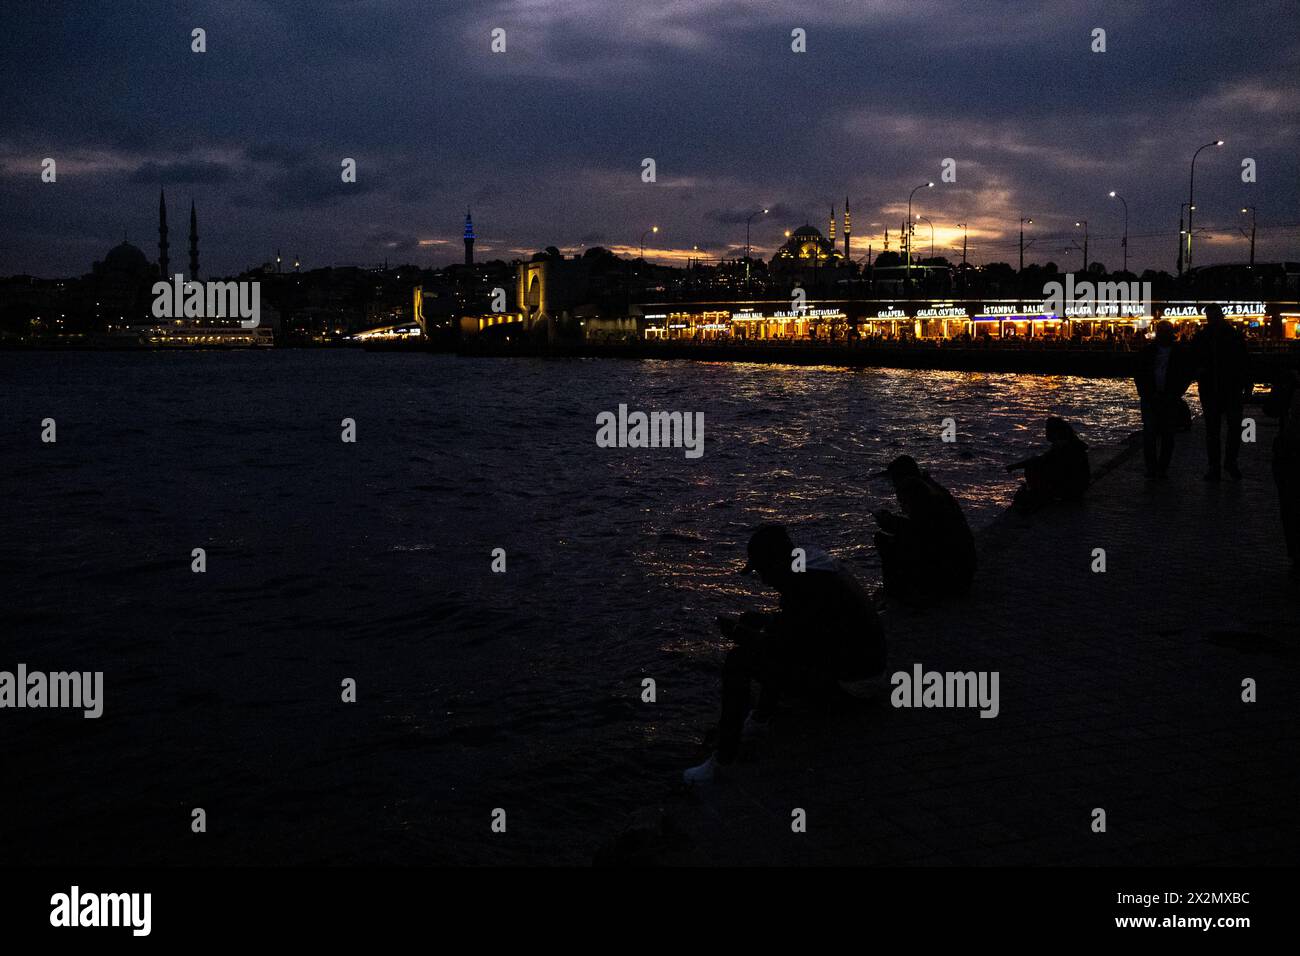 The Galata Bridge on the estuary of the Golden Horn at dusk, linking the districts of Sultanahmet and Galata with the New Mosque (Yeni Cami or Valide Stock Photo